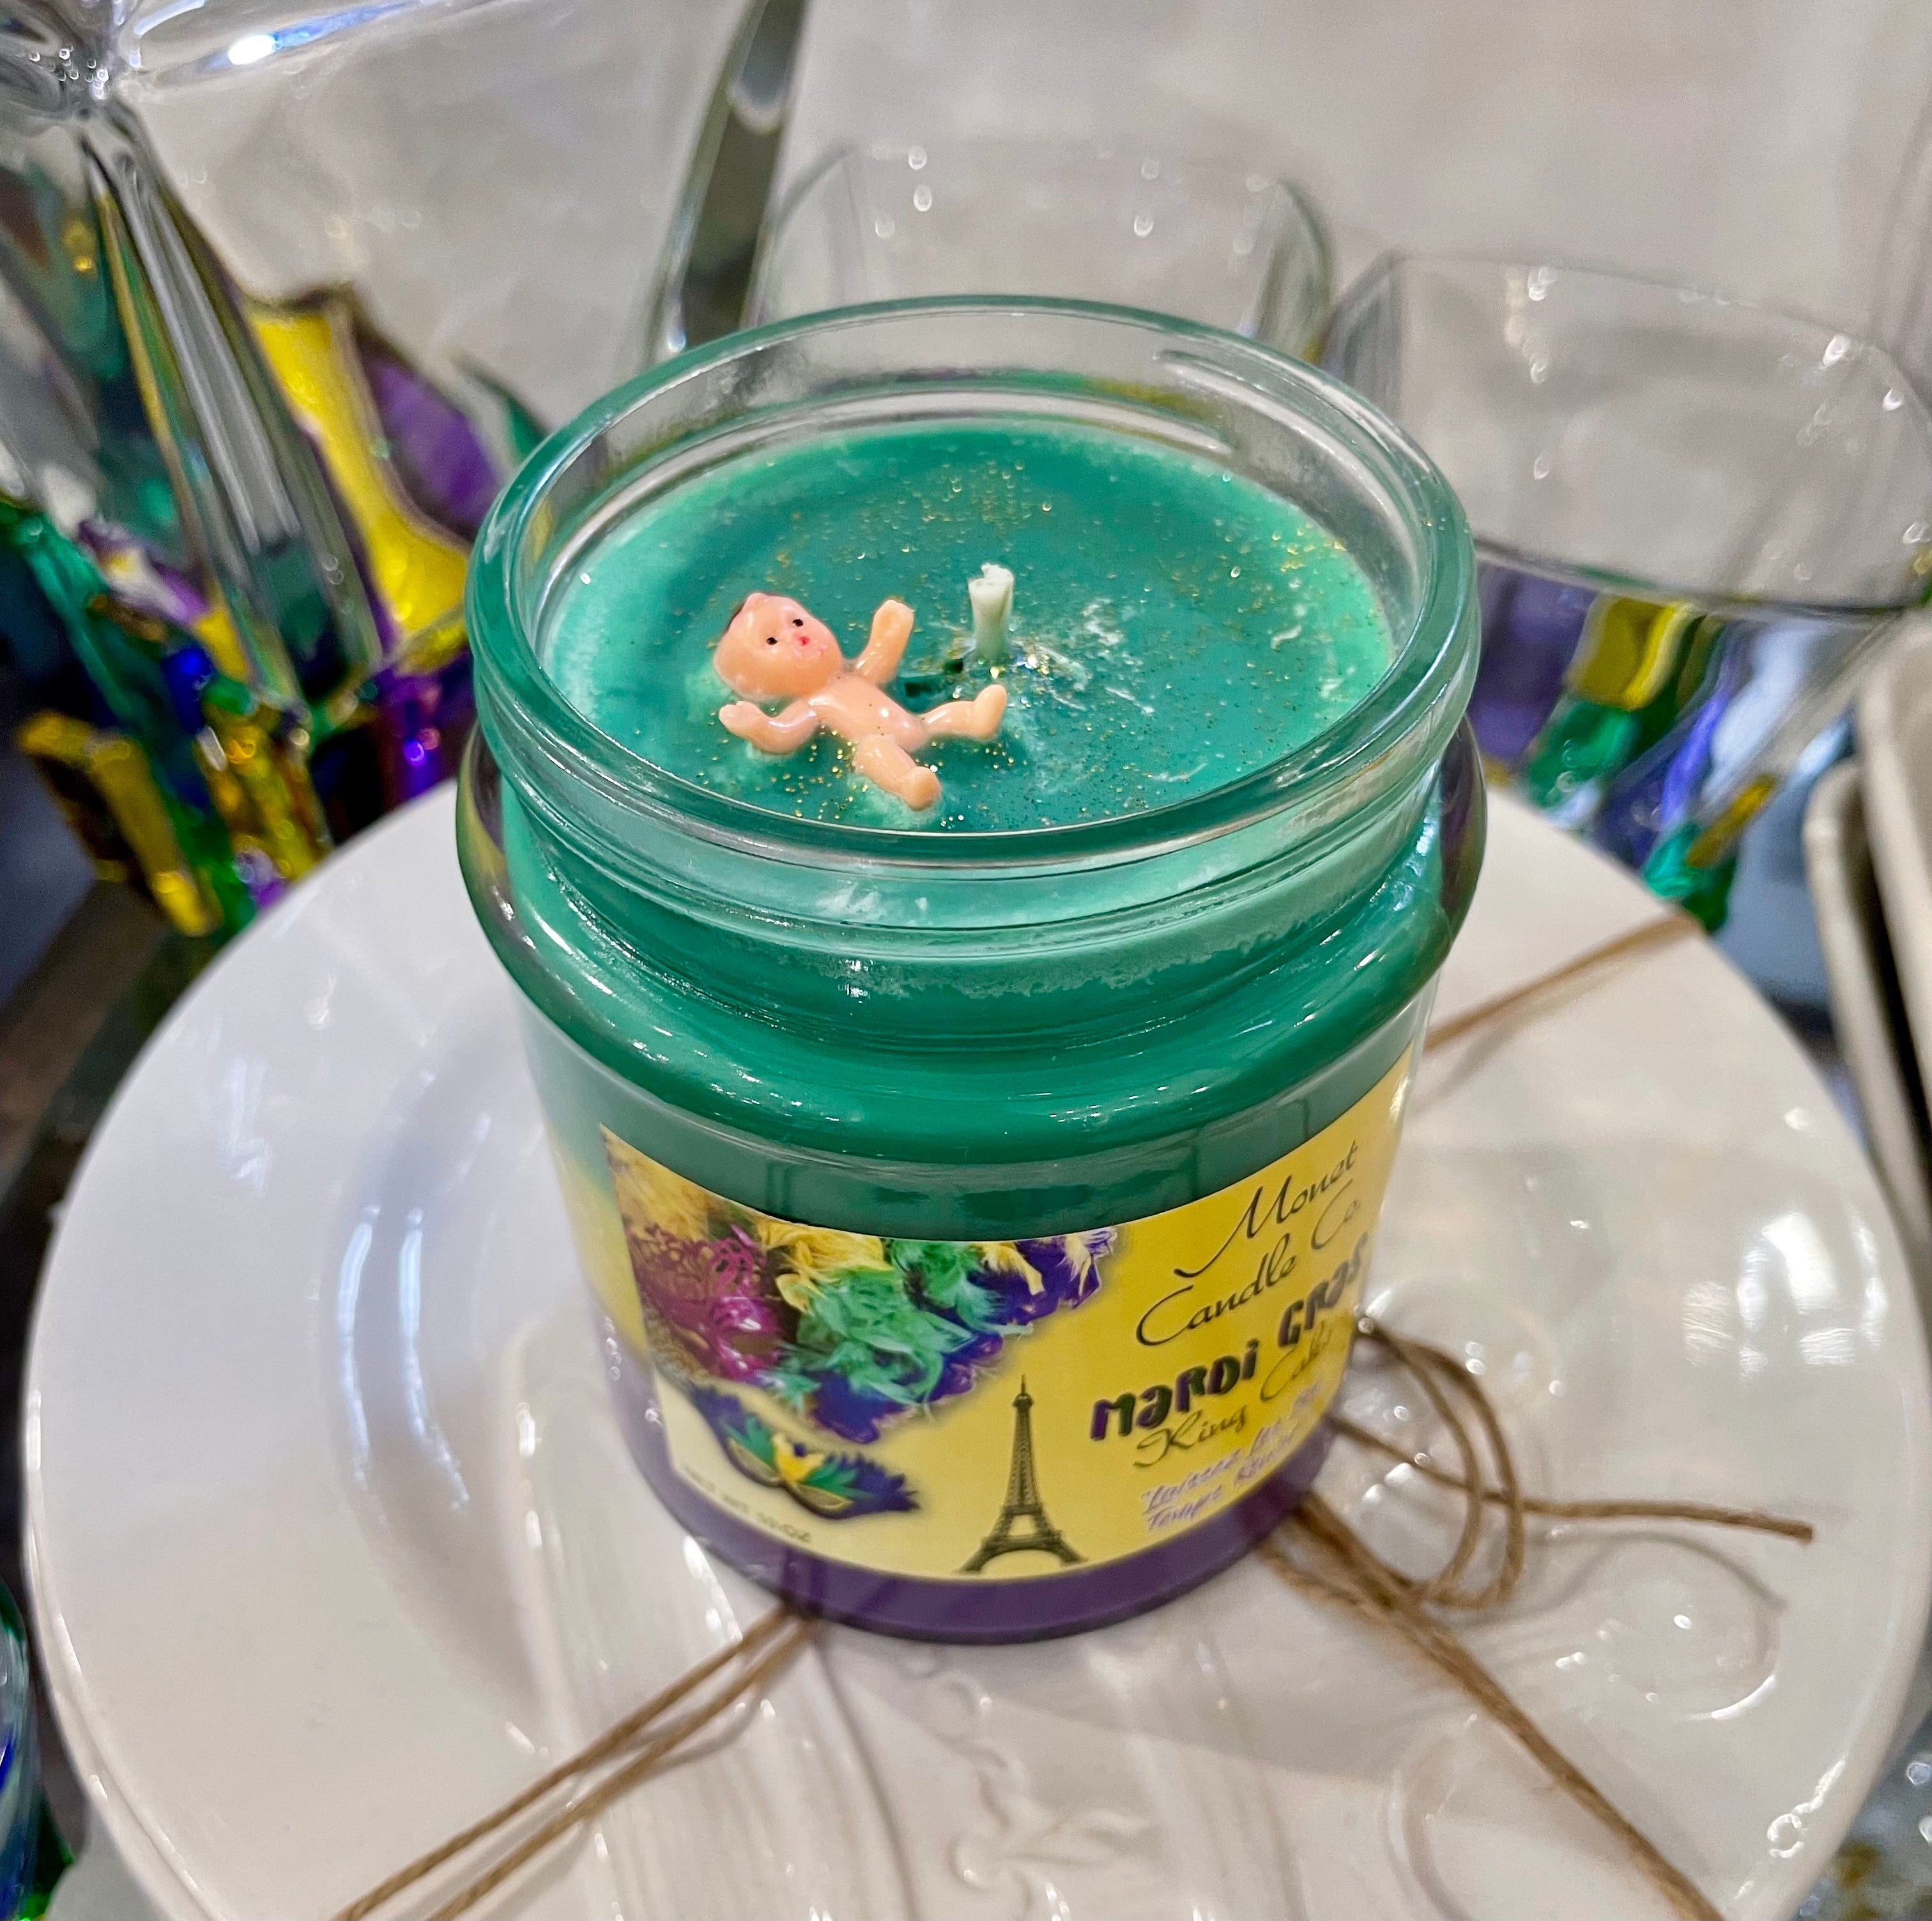 Monet Candle Company Monet Candle Company Mardi Gras King Cake Soy Candle - Little Miss Muffin Children & Home